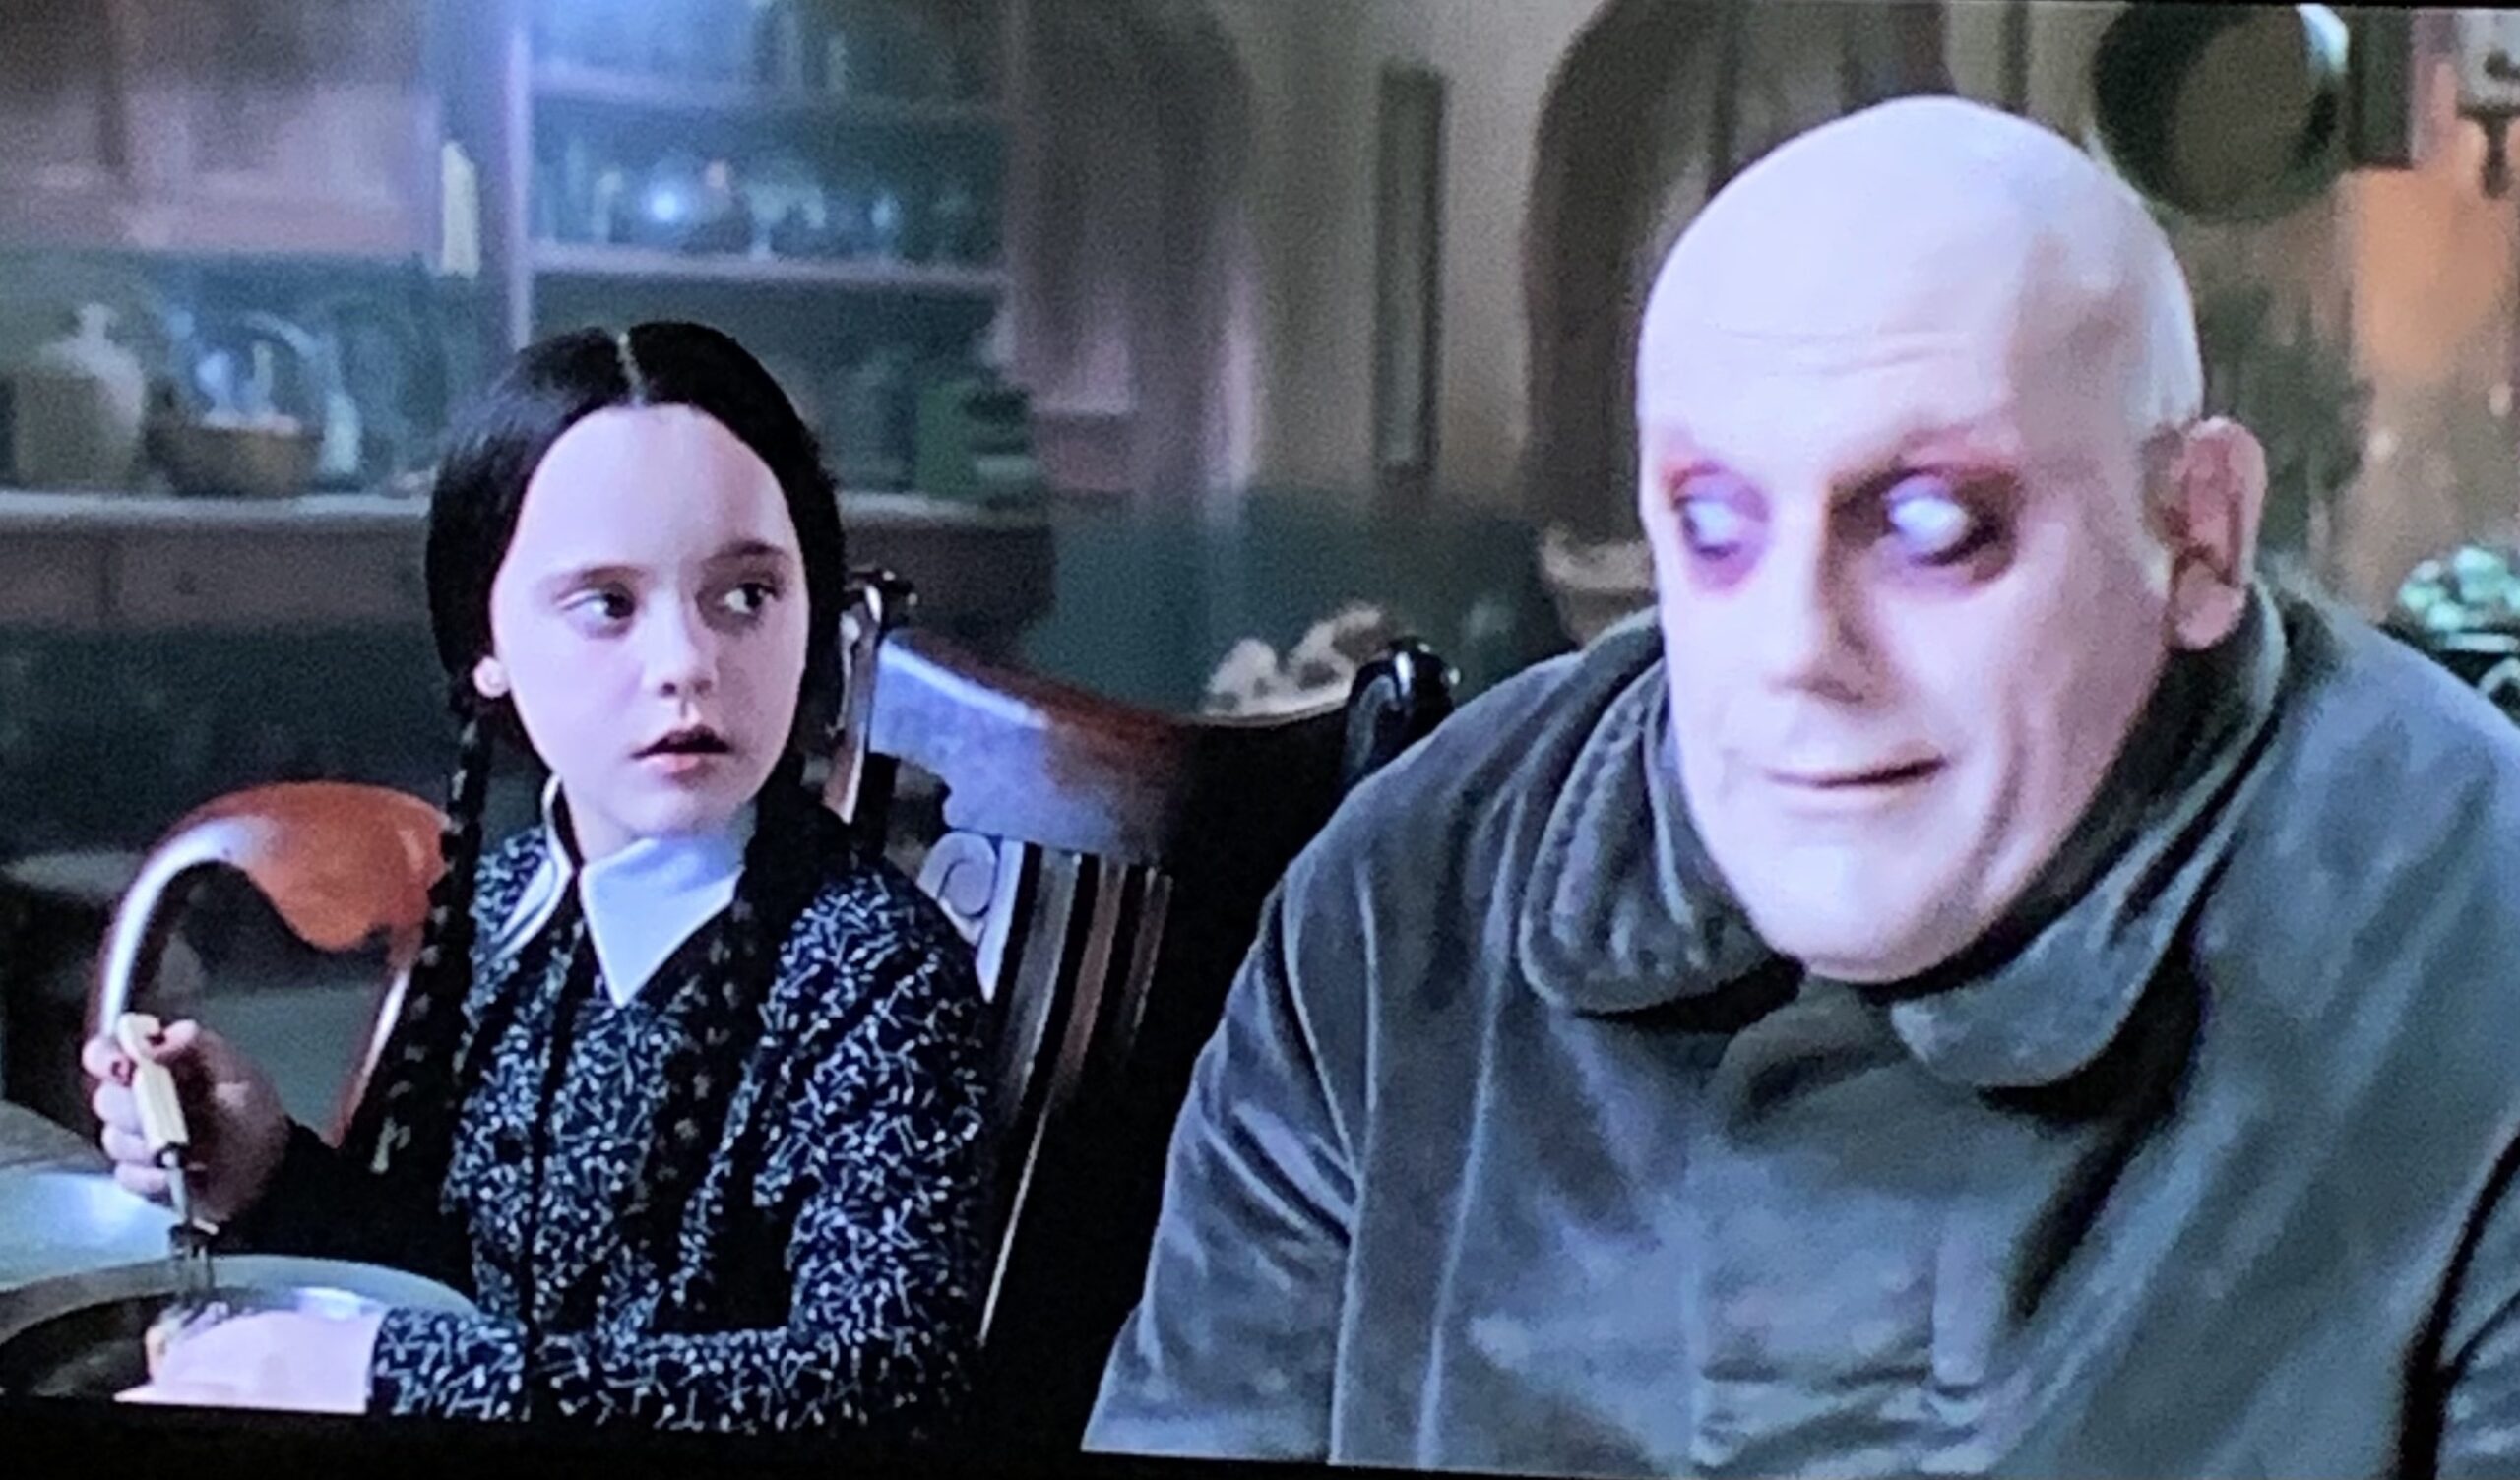 Wednesday Addams and uncle Fester